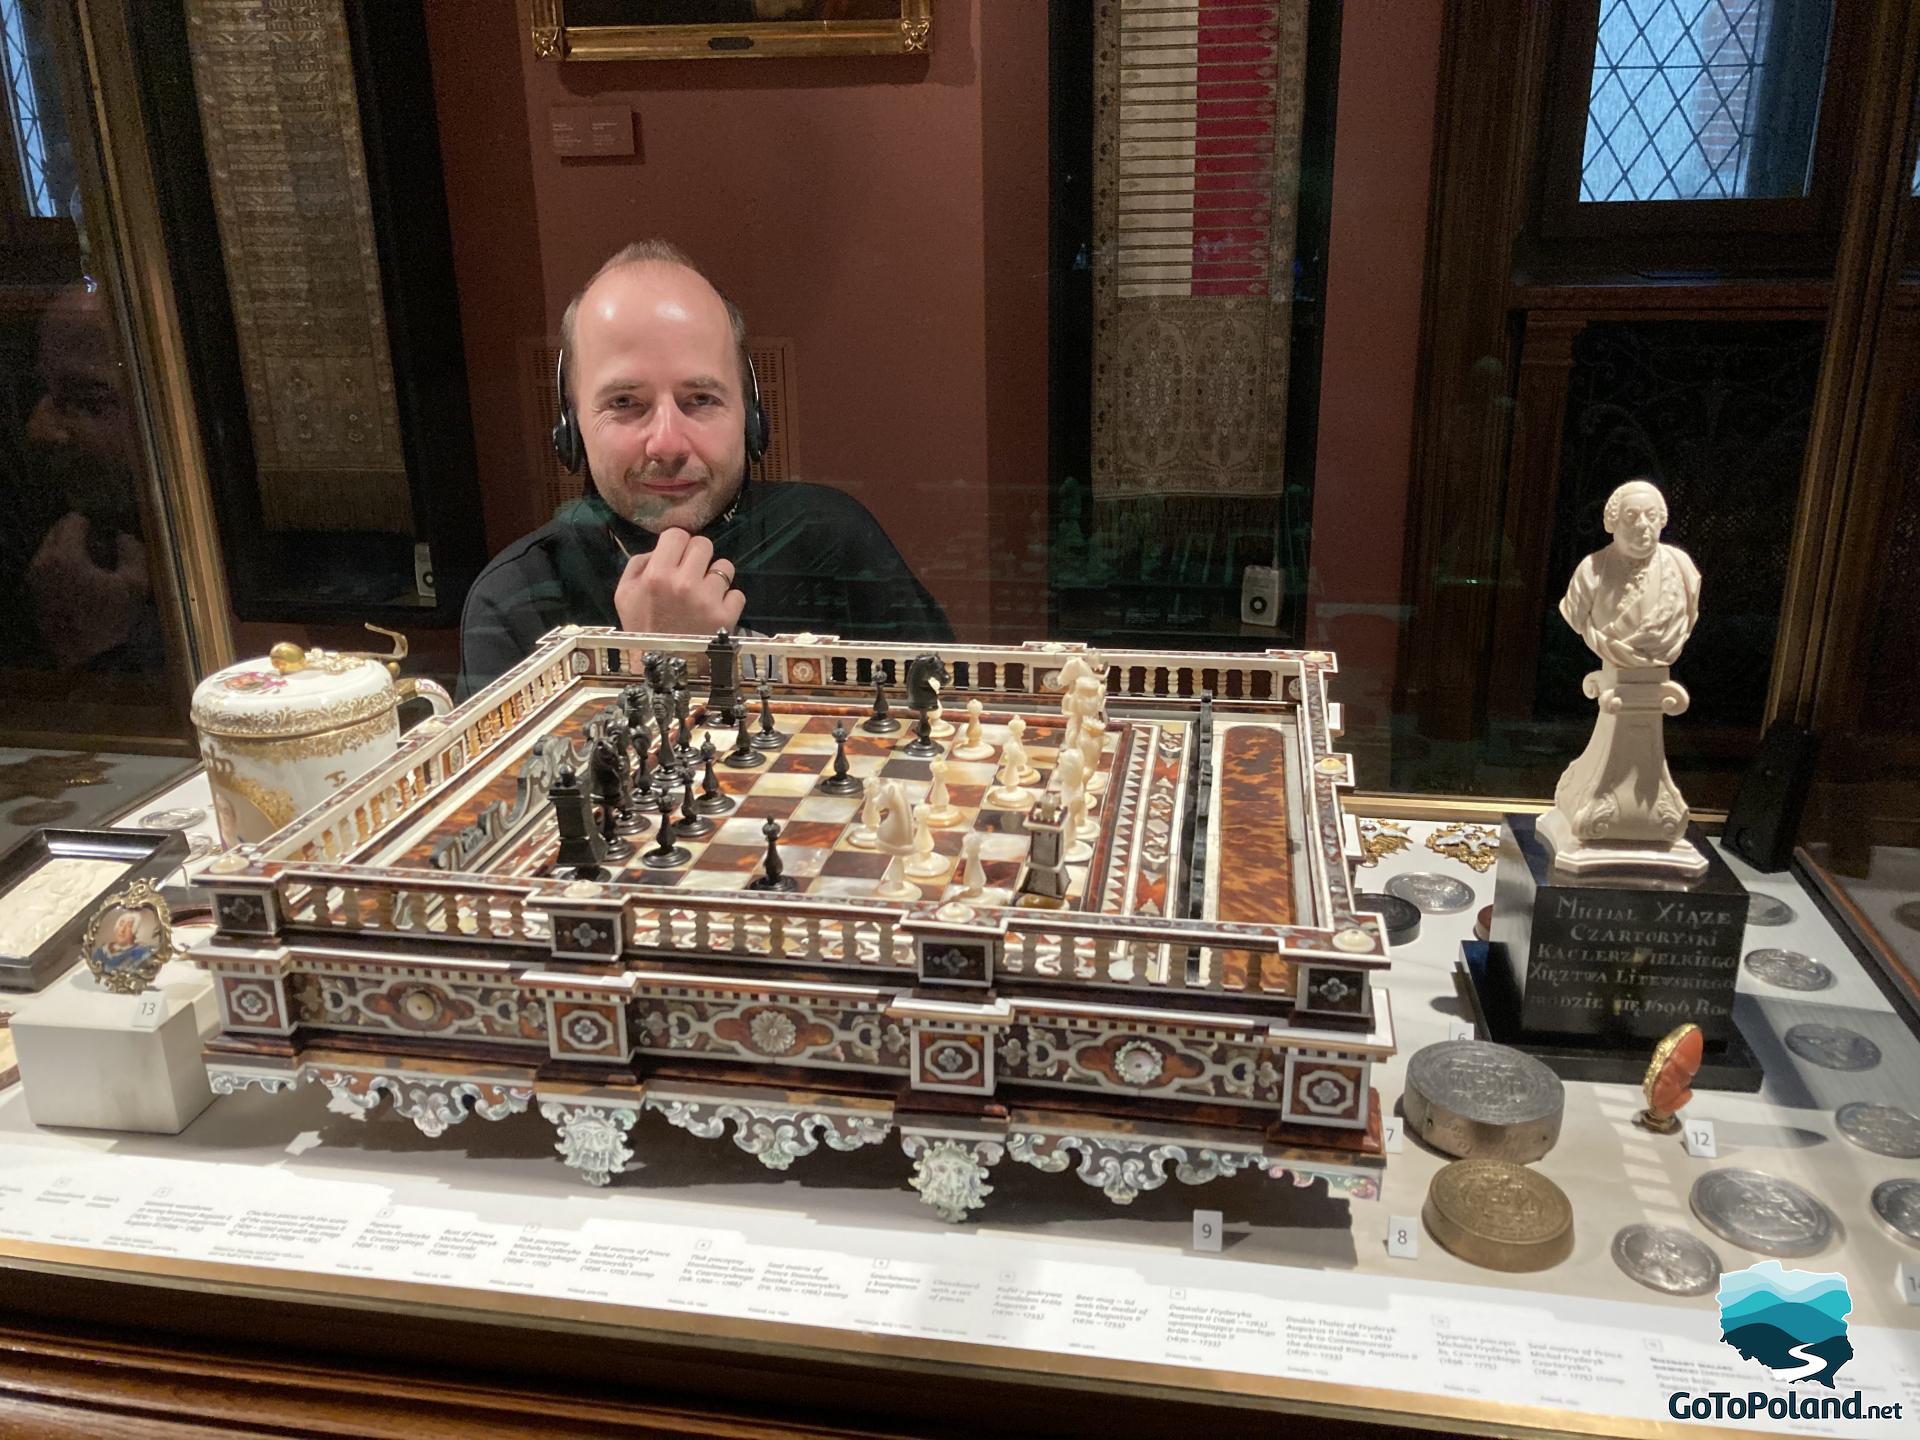 A man is next to the old chess. There are also old coins